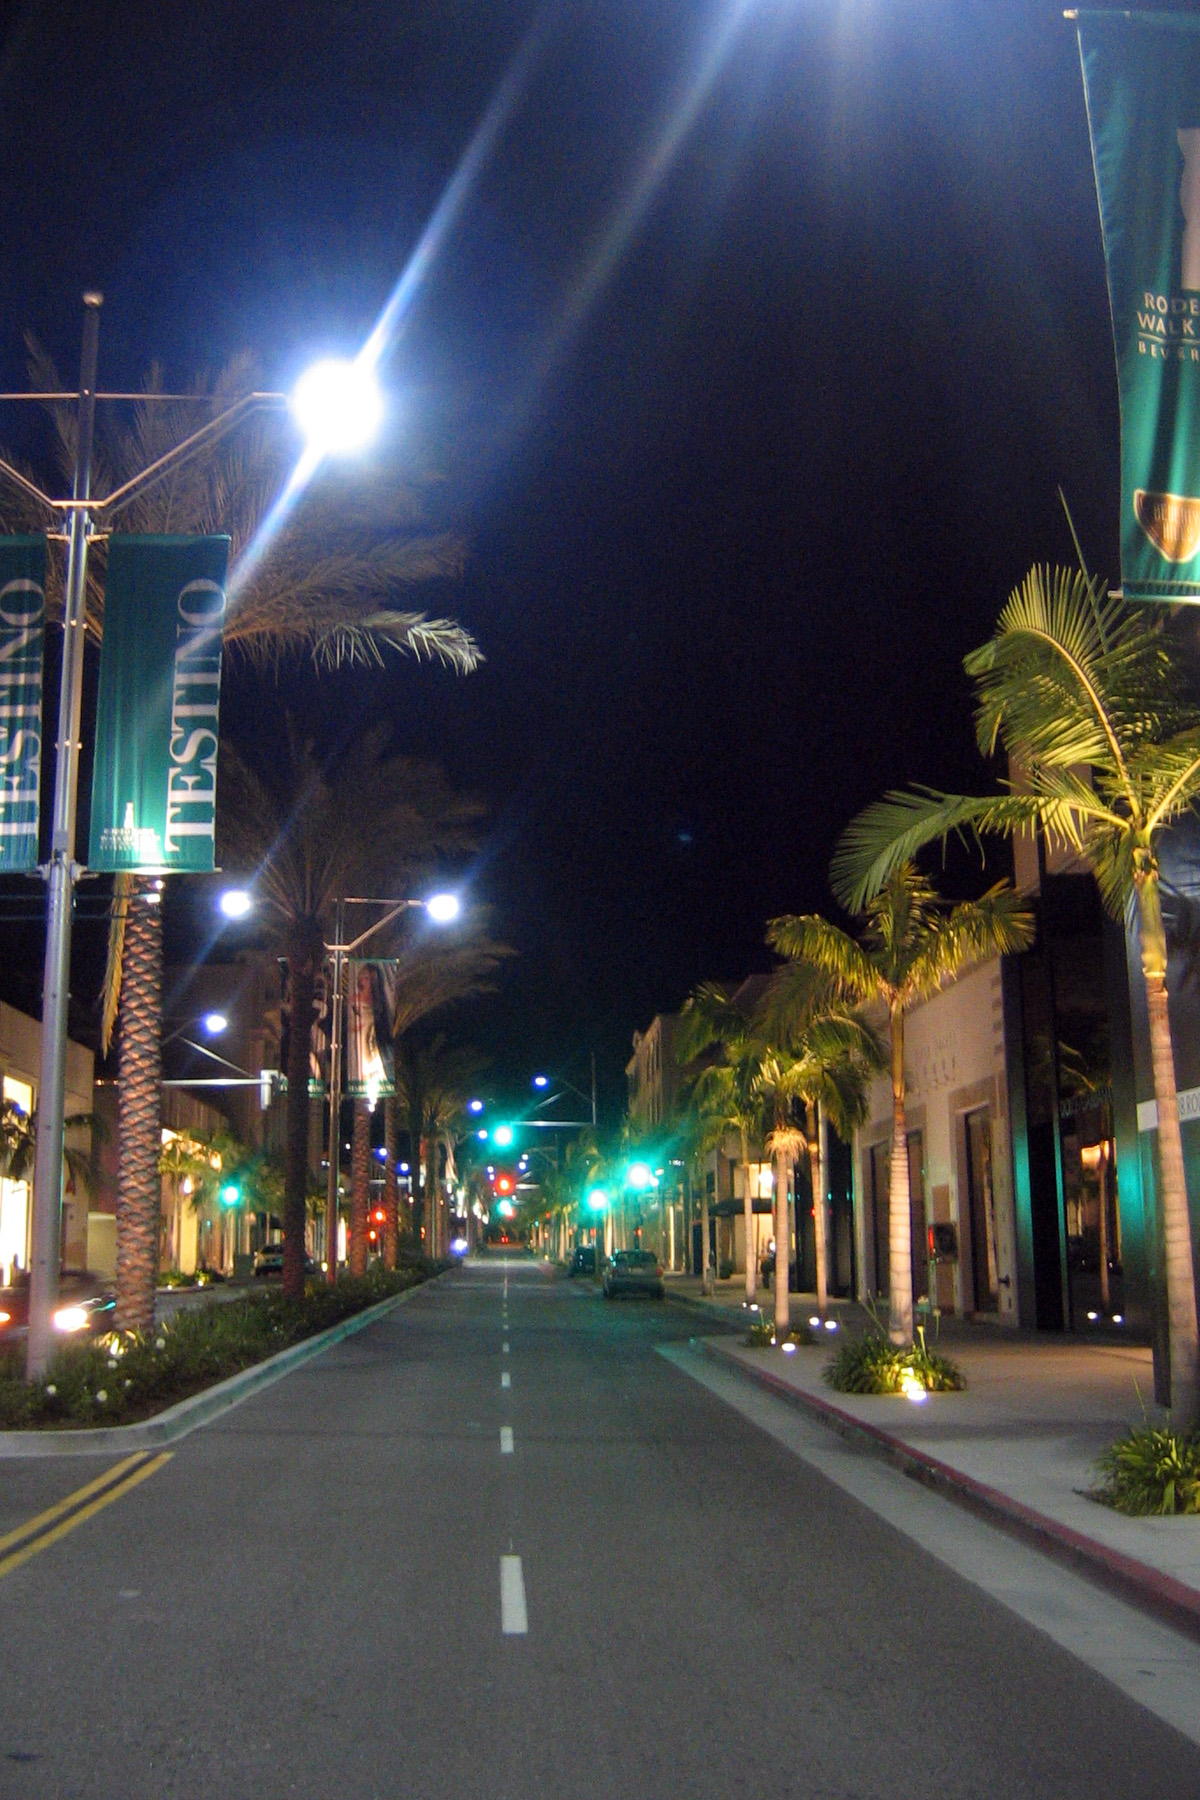 go to rodeo drive at night for pasta and aesthetic photos